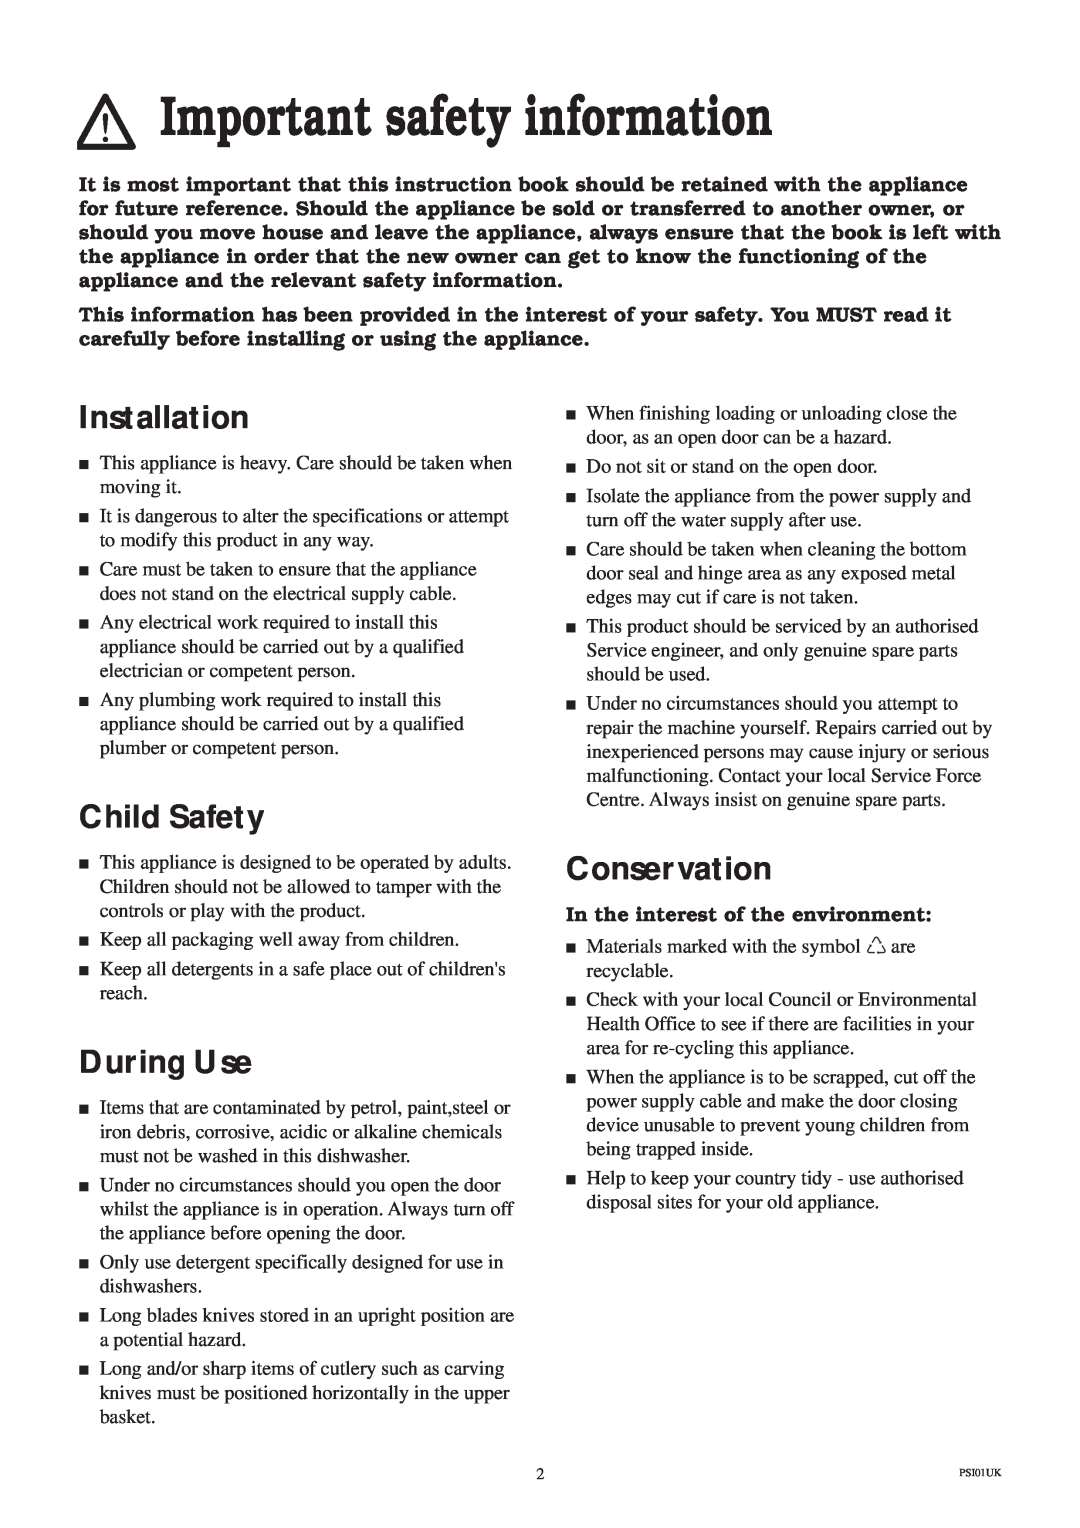 Zanussi ZT 685 manual Important safety information, Installation, Child Safety, During Use, Conservation 